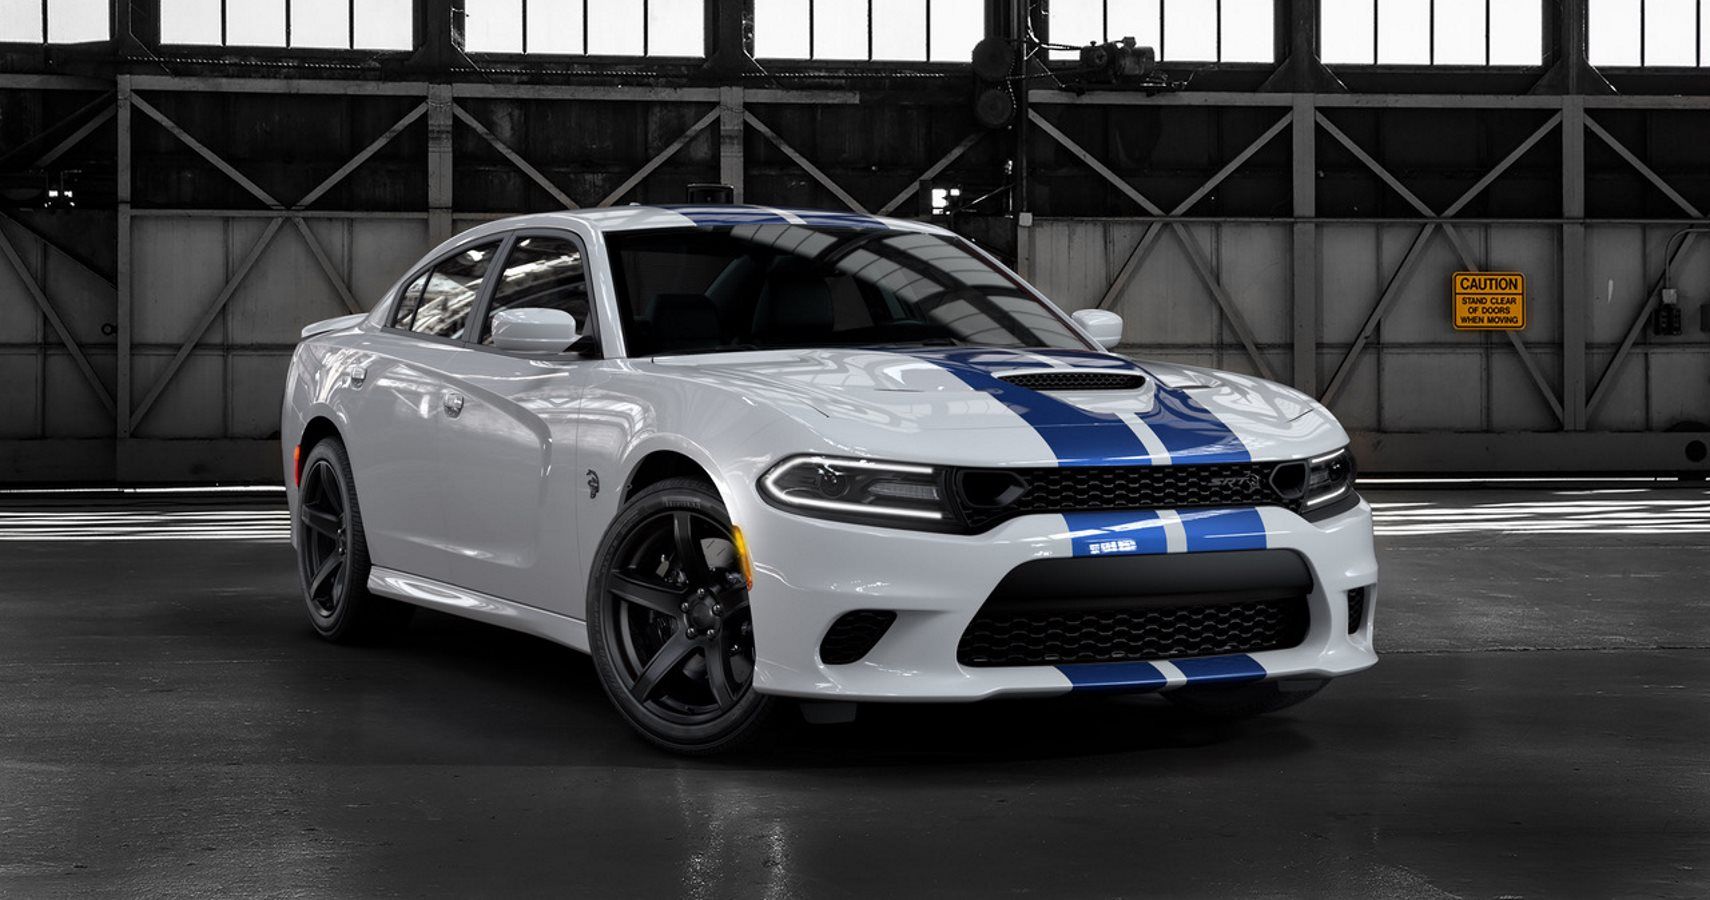 Dodge Upgrades 2019 Charger SRT Hellcats With New Stripes